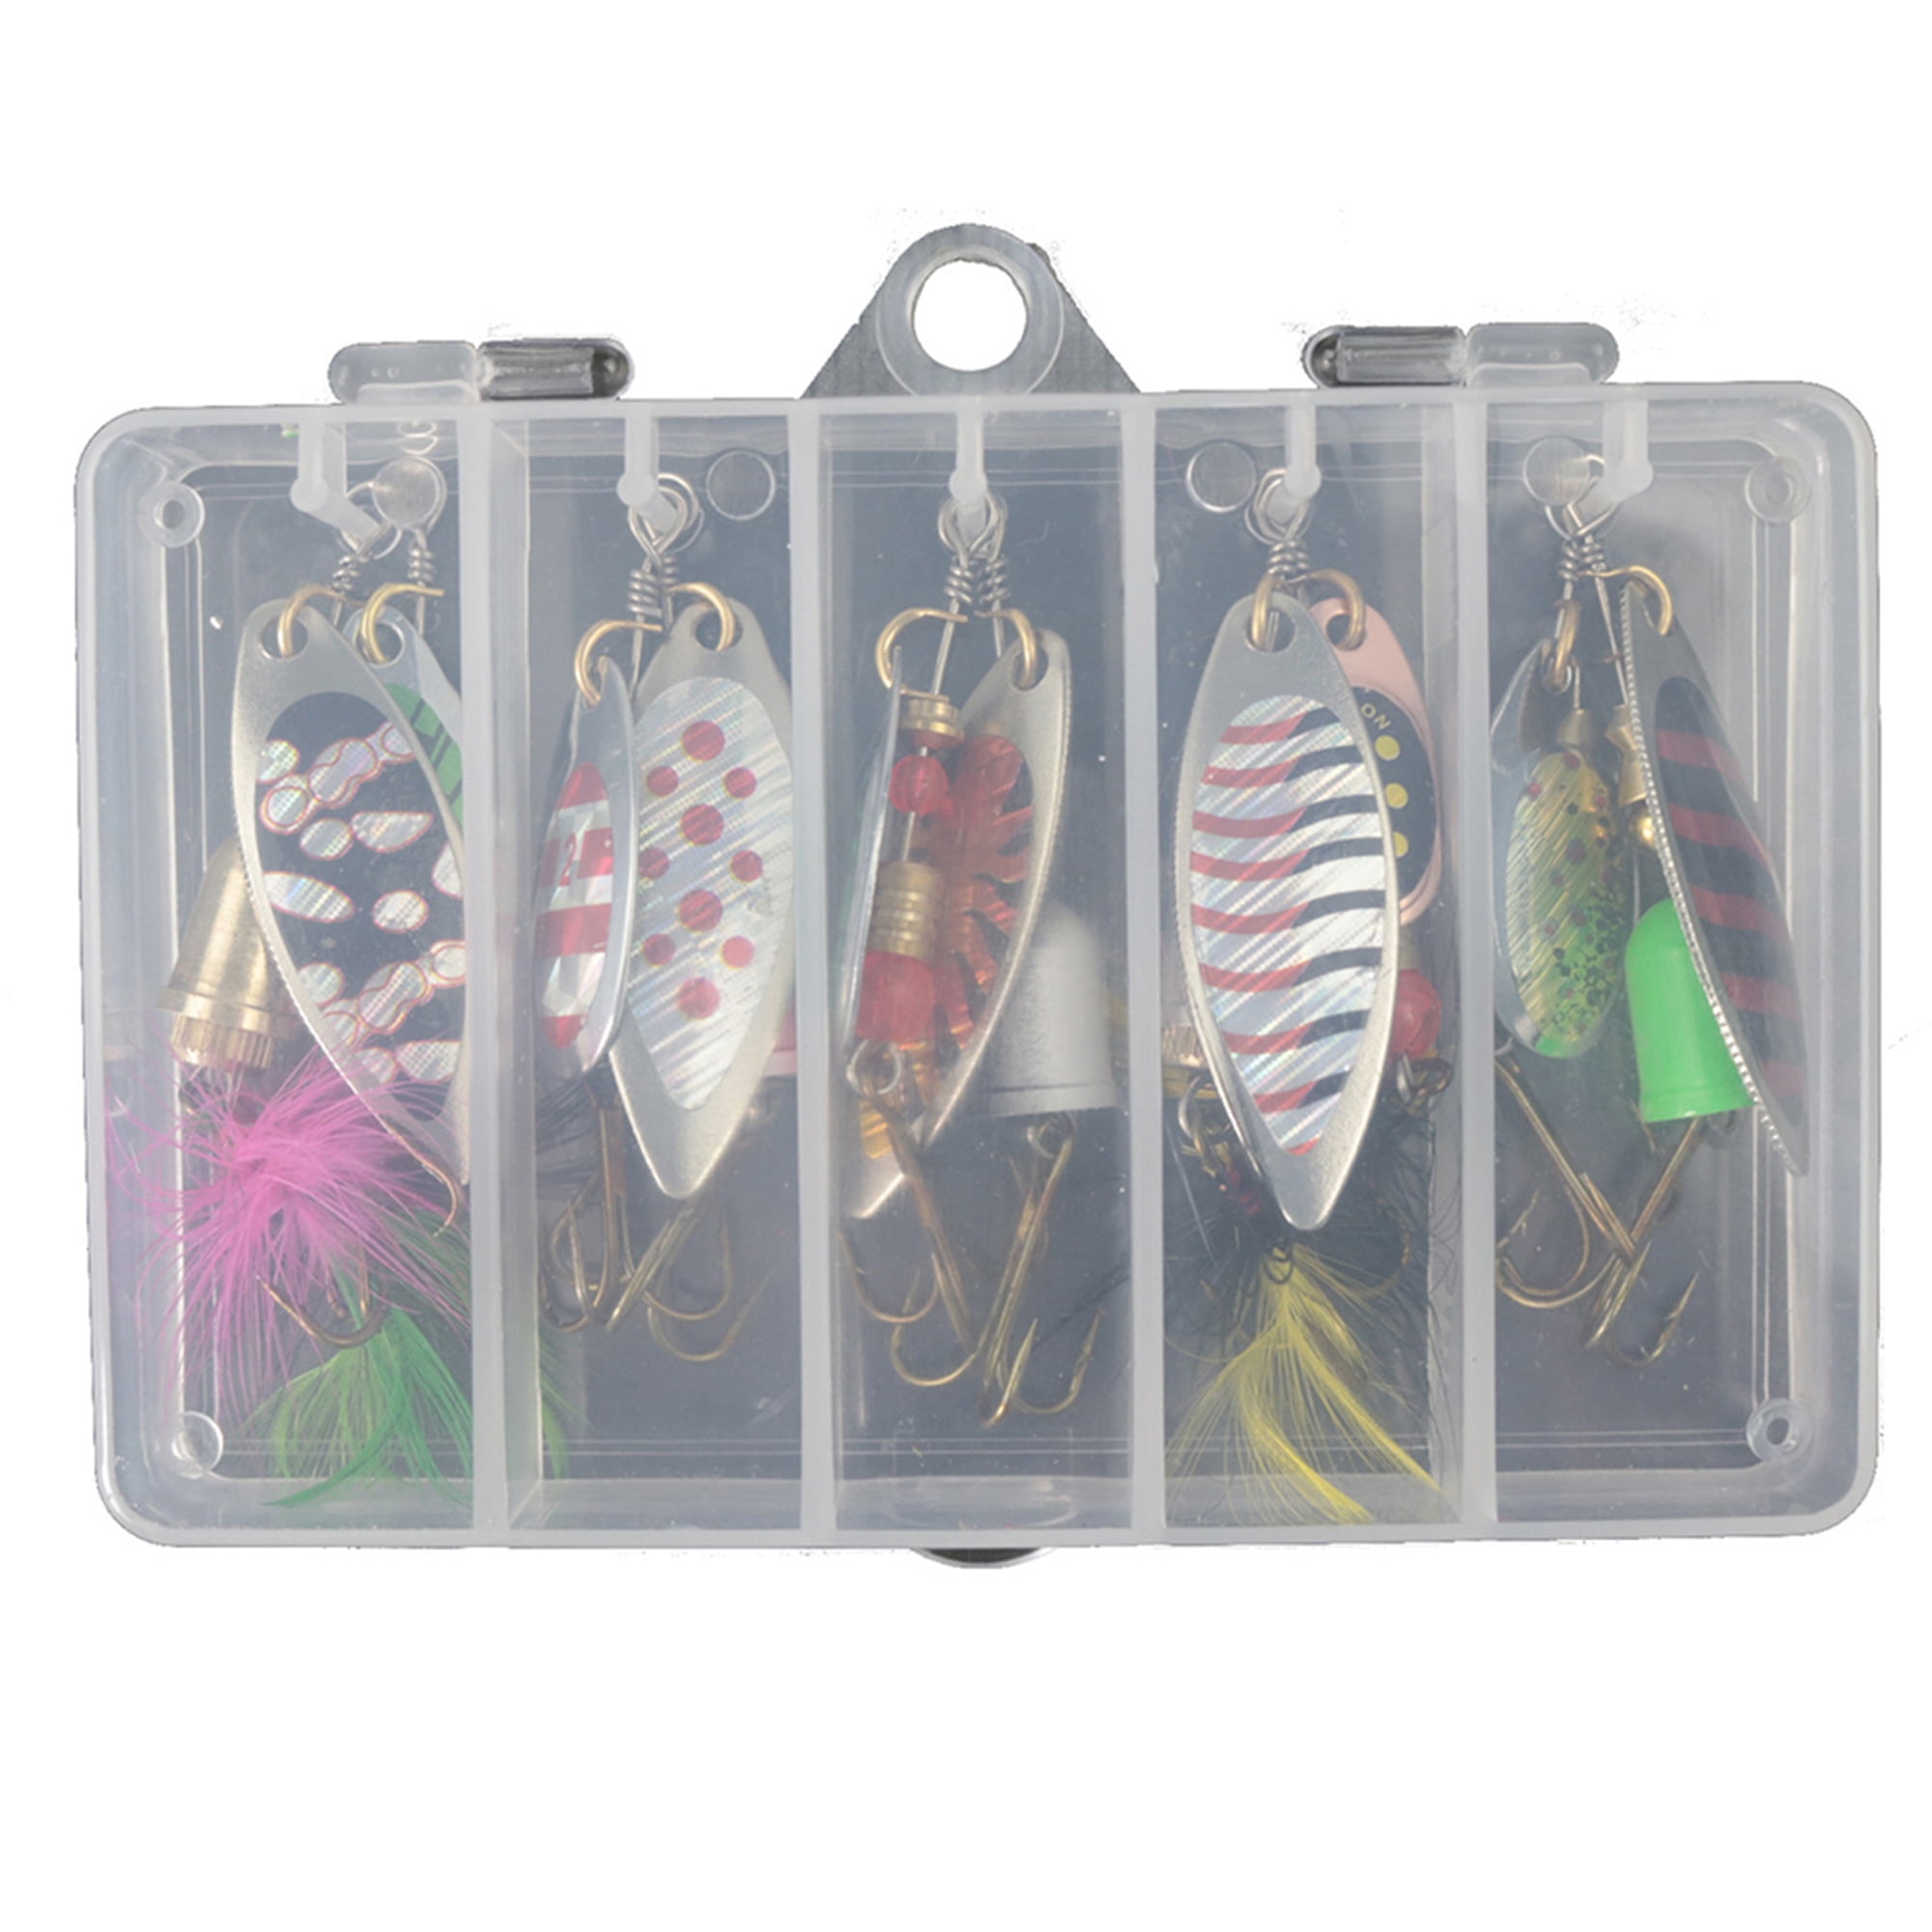 DODOING 10pcs Fishing Lures Spinnerbait for Bass Trout Salmon